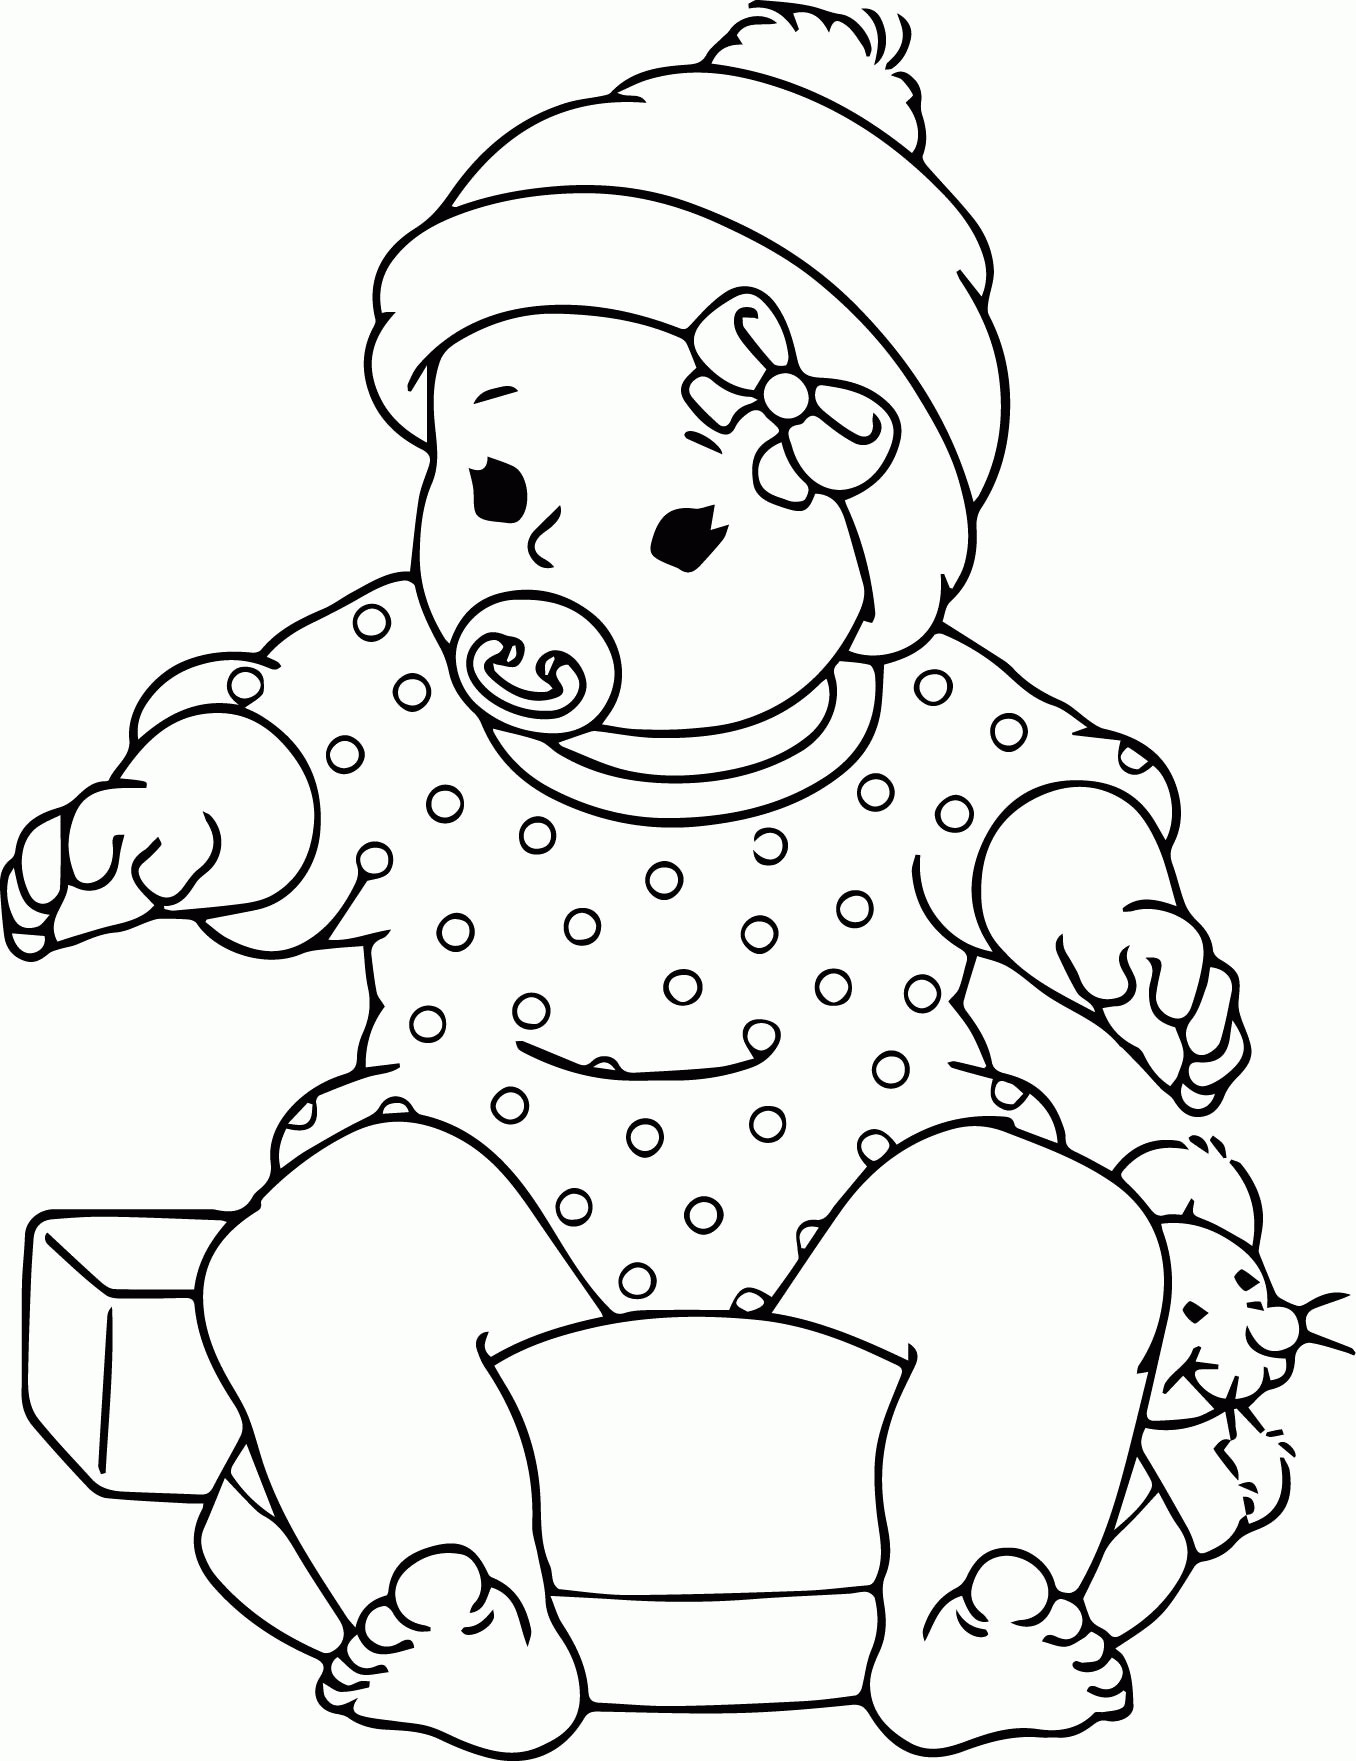 Baby Animal Coloring Page
 Baby Animal Christmas Coloring Pages Coloring Home